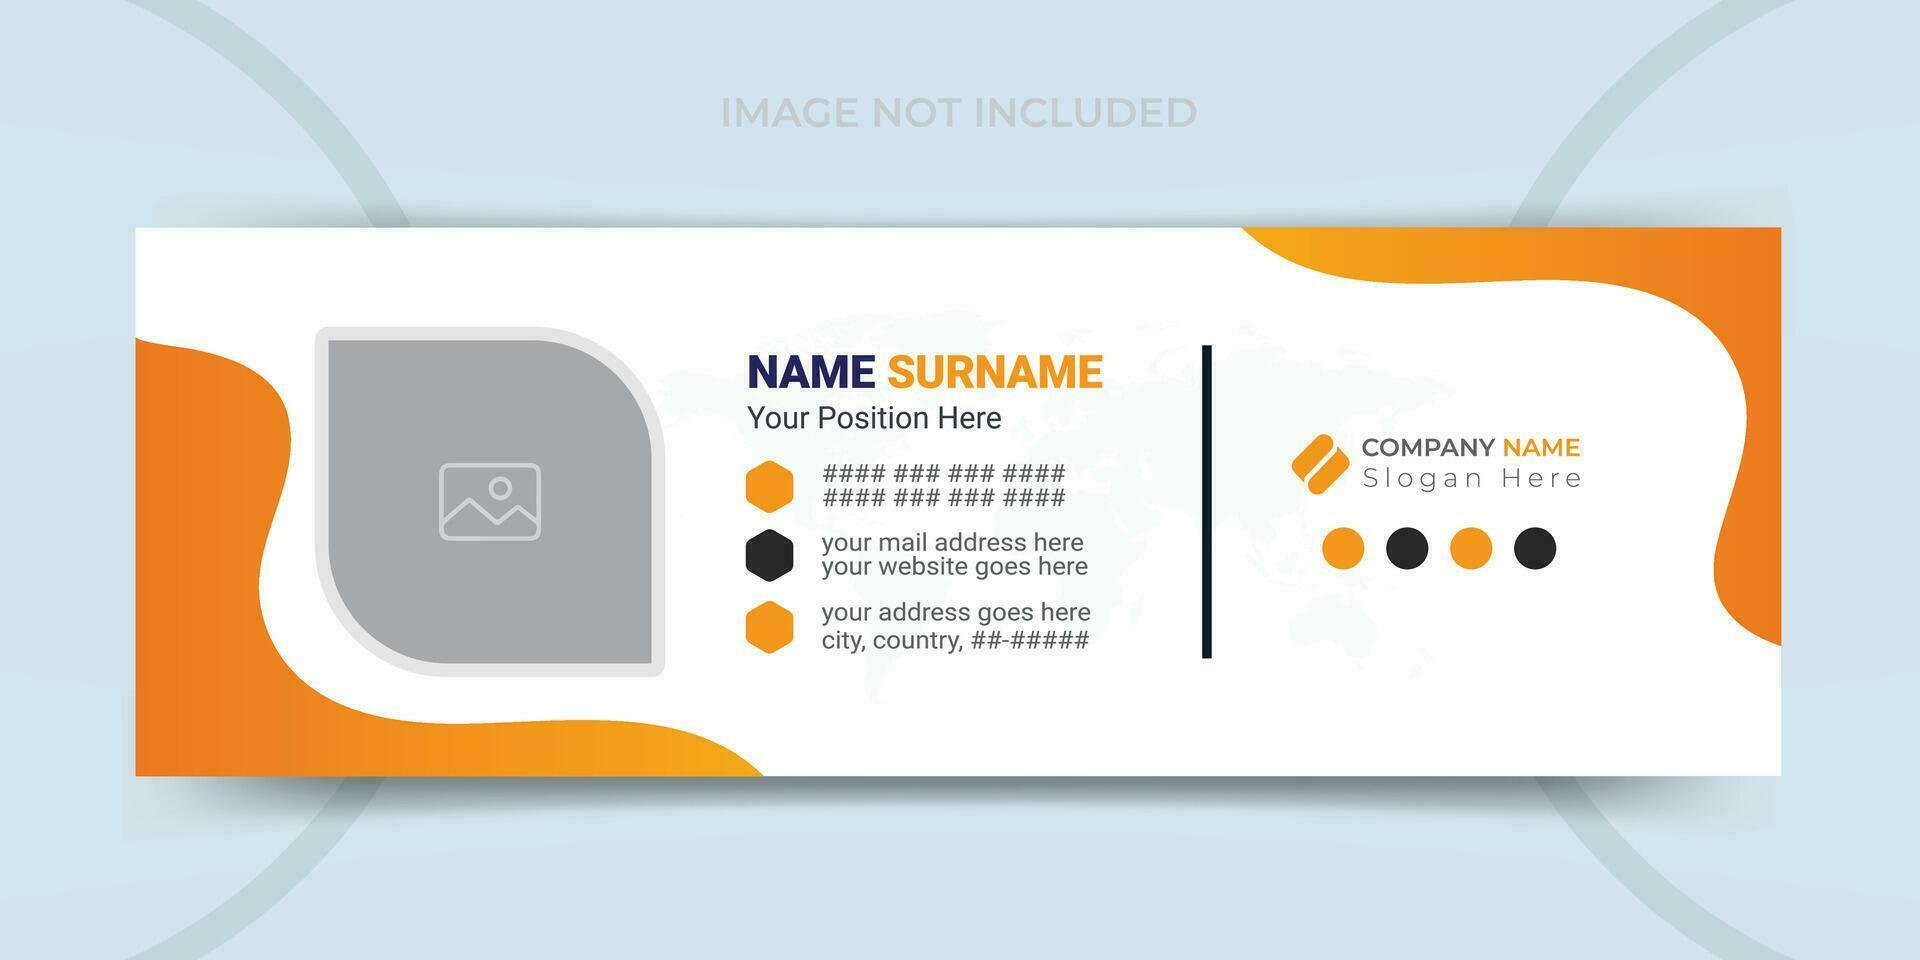 Modern and minimalist email signature or email footer template design vector